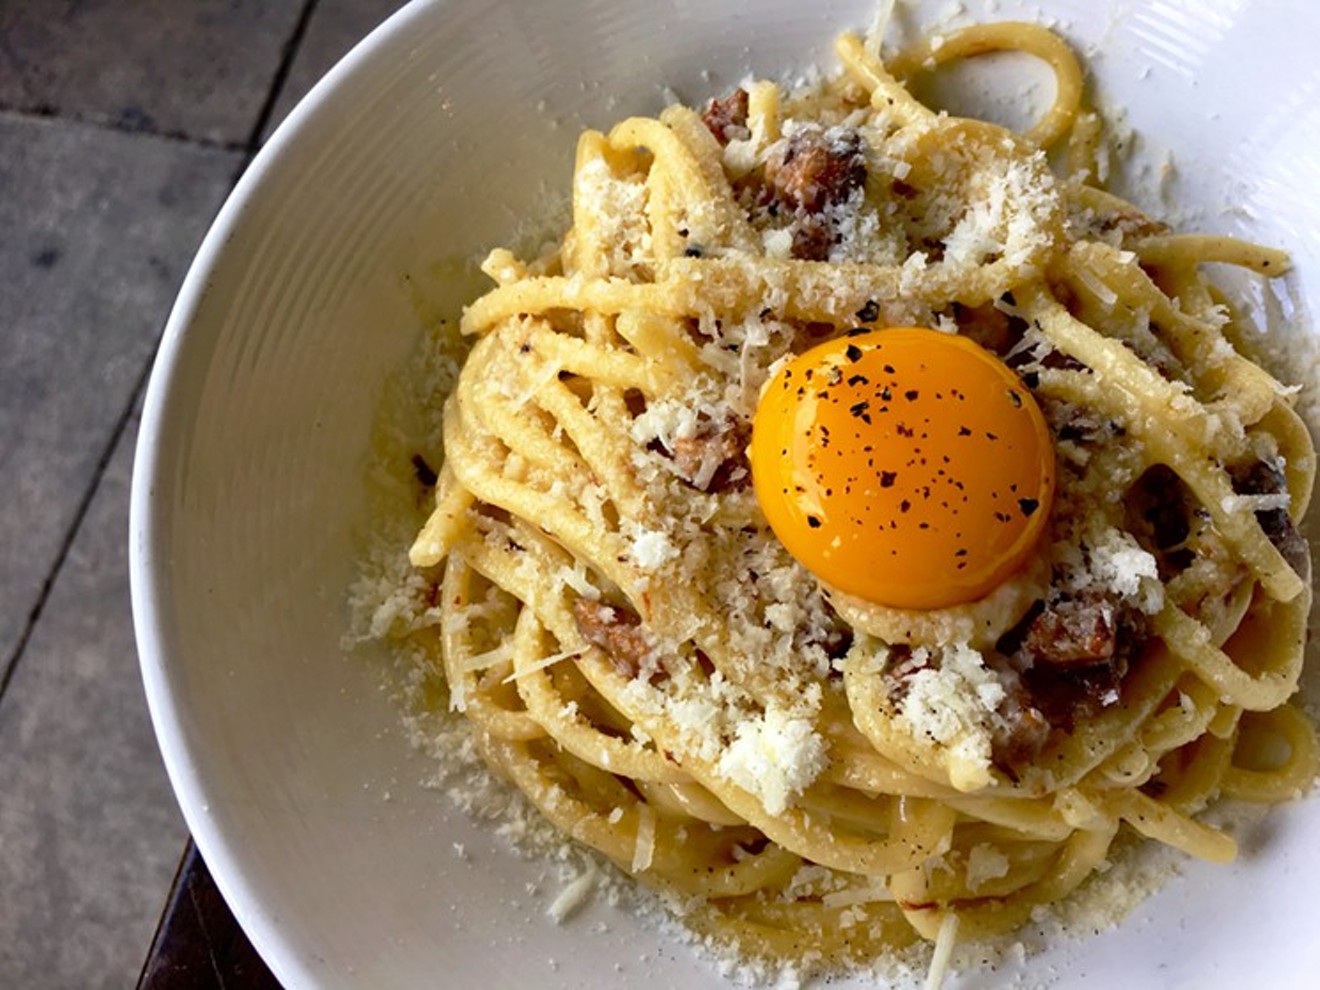 Order bucatini carbonara topped with Parmigiano-Reggiano, black pepper, and an egg yolk during Fooq's Spice brunch.